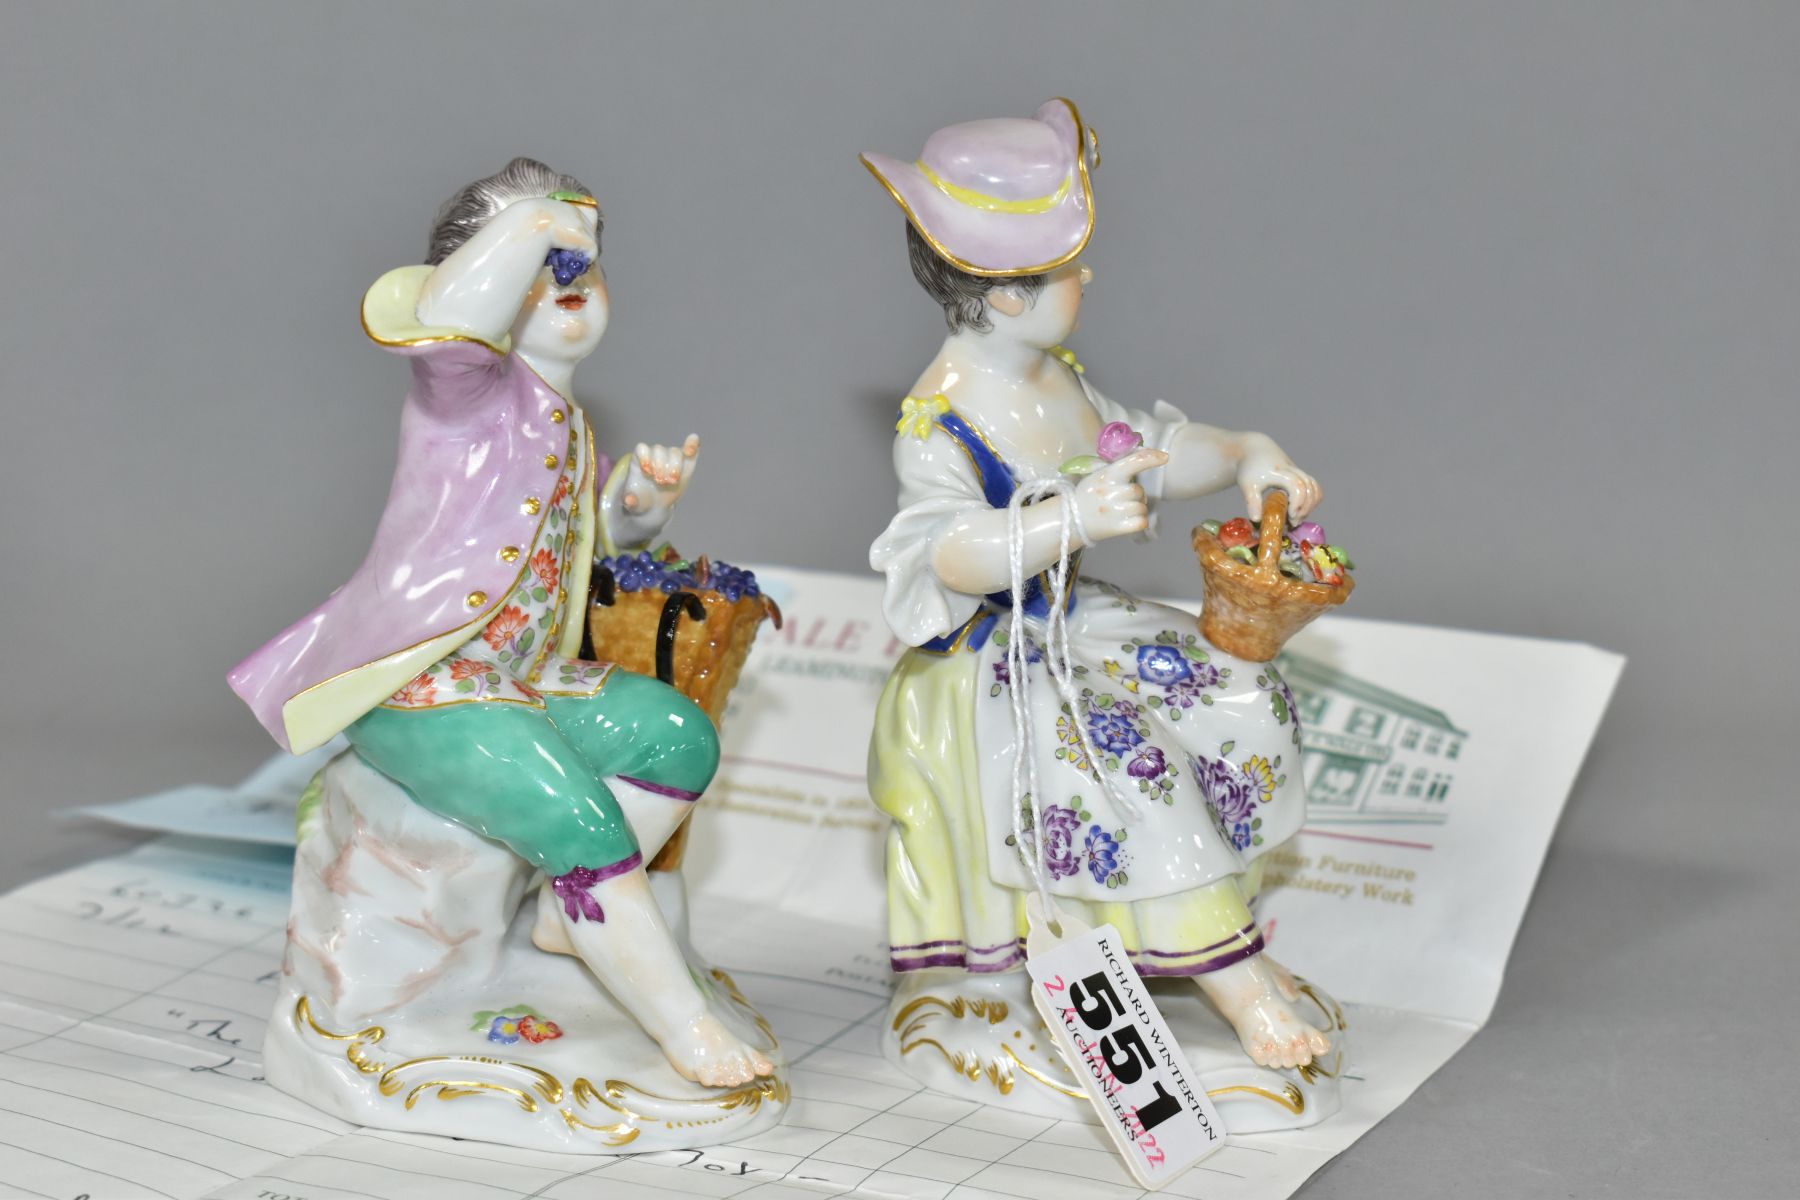 A PAIR OF EARLY 20TH CENTURY MEISSEN FIGURES OF A YOUNG BOY AND GIRL, both seated, the boy holding a - Image 4 of 6